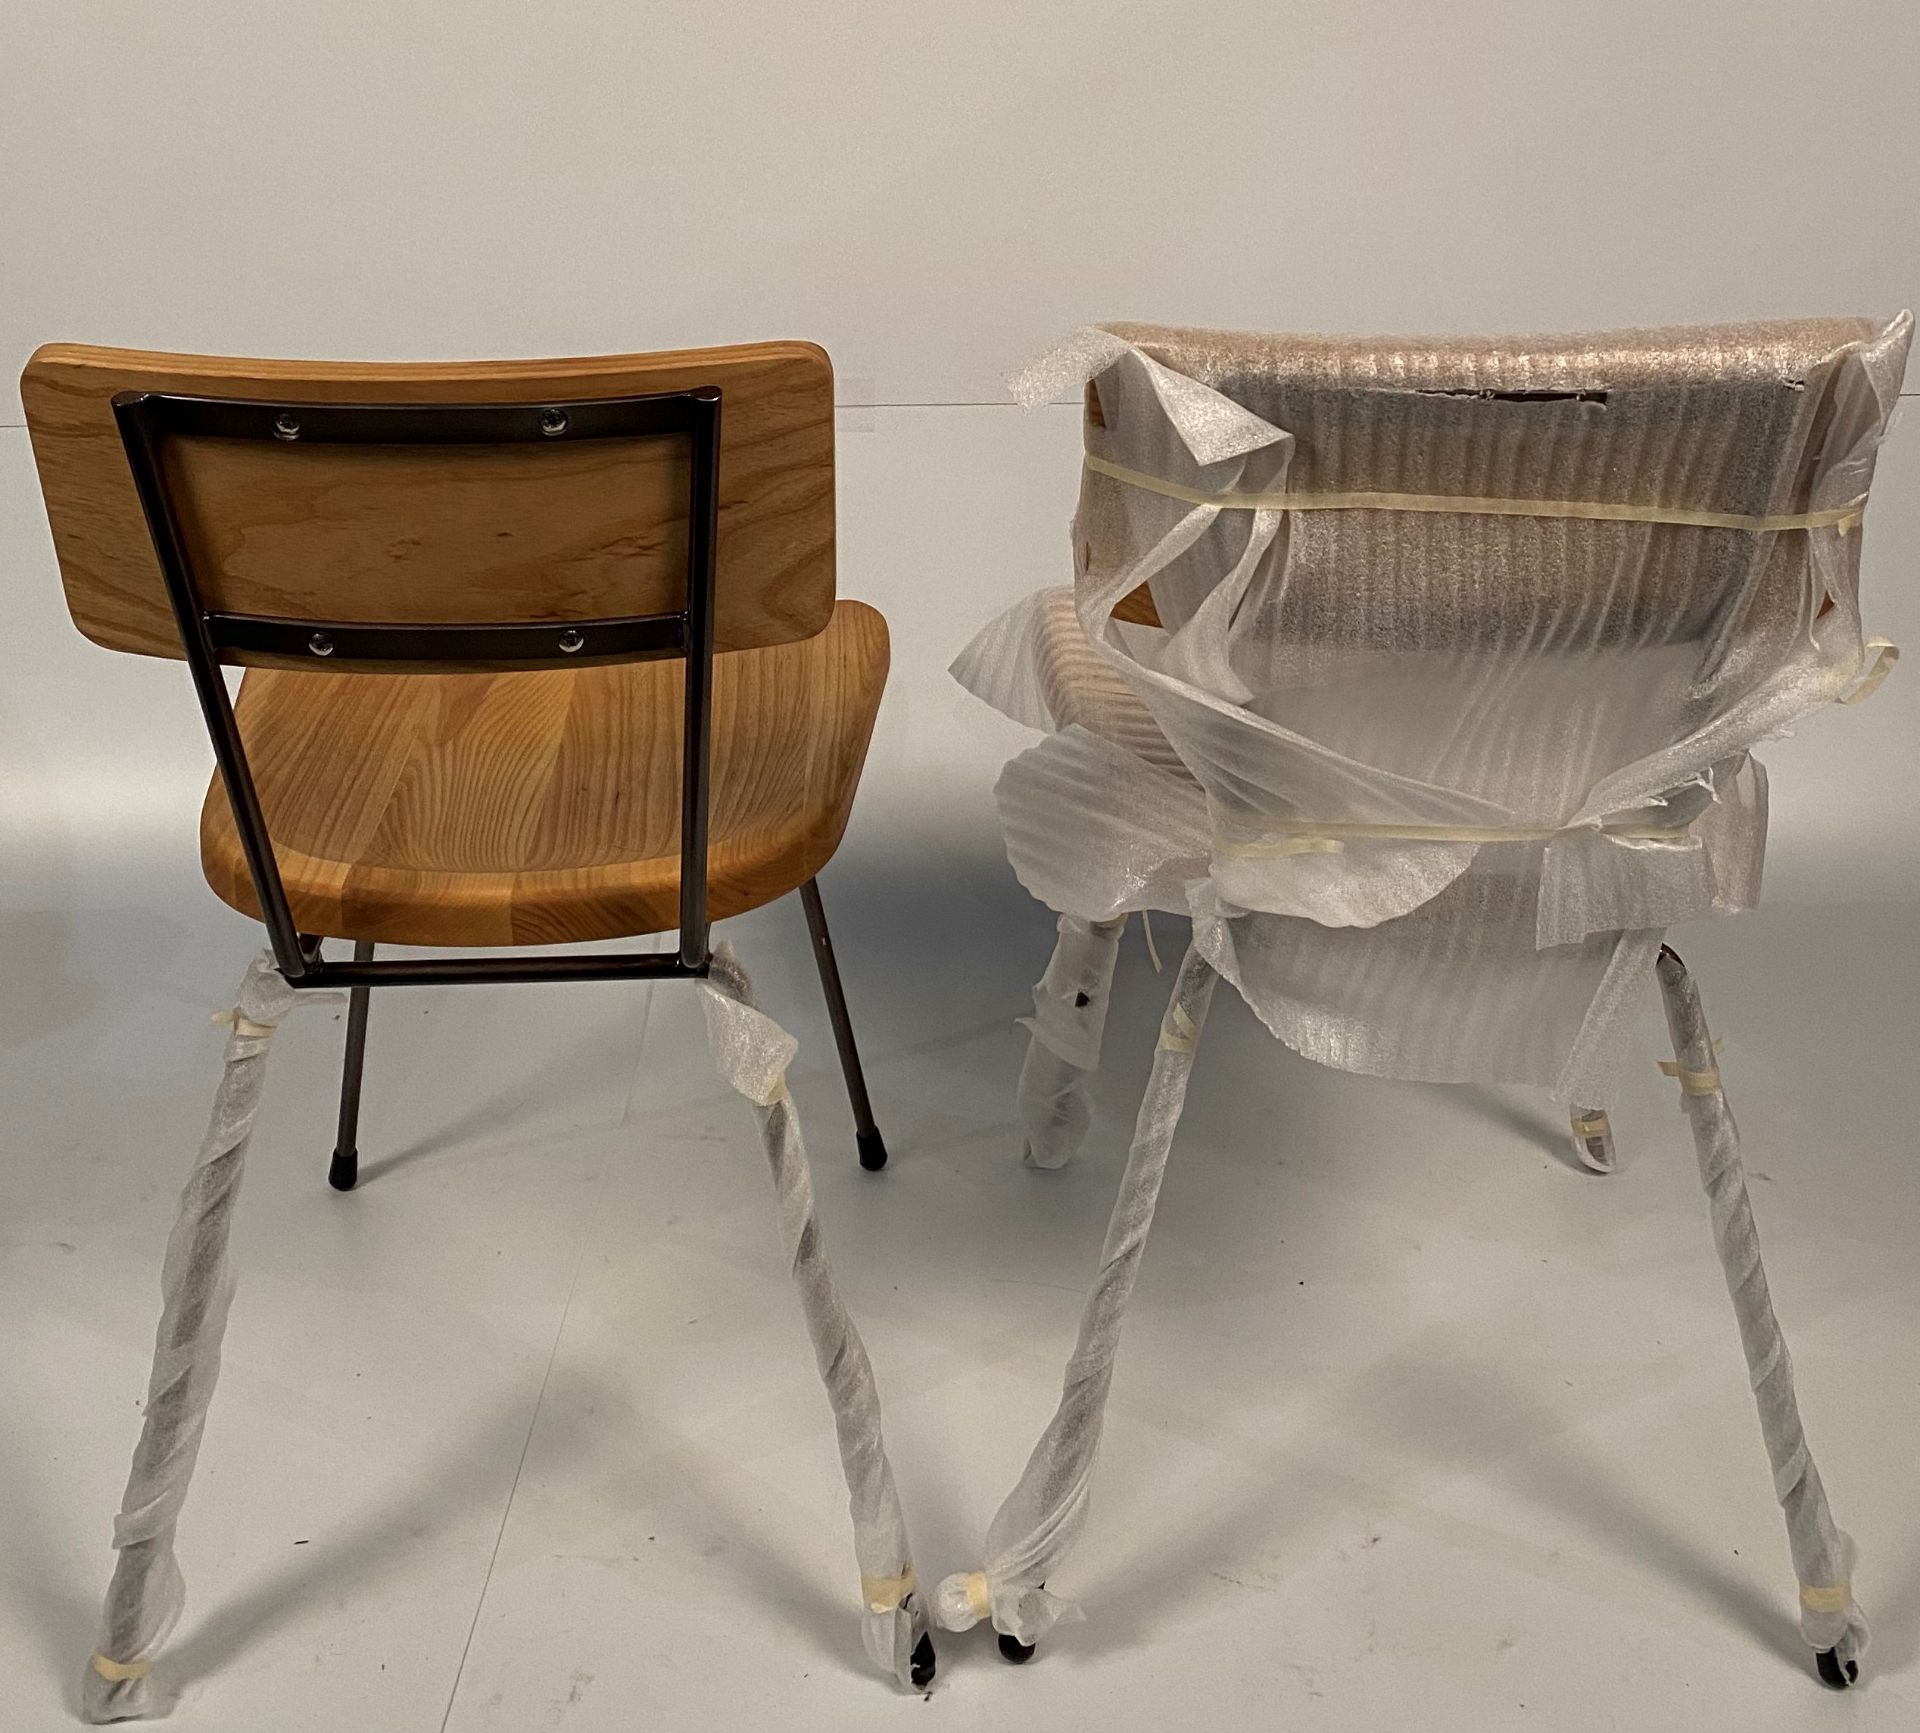 4 x College wooden chairs with metal frames - Image 3 of 4